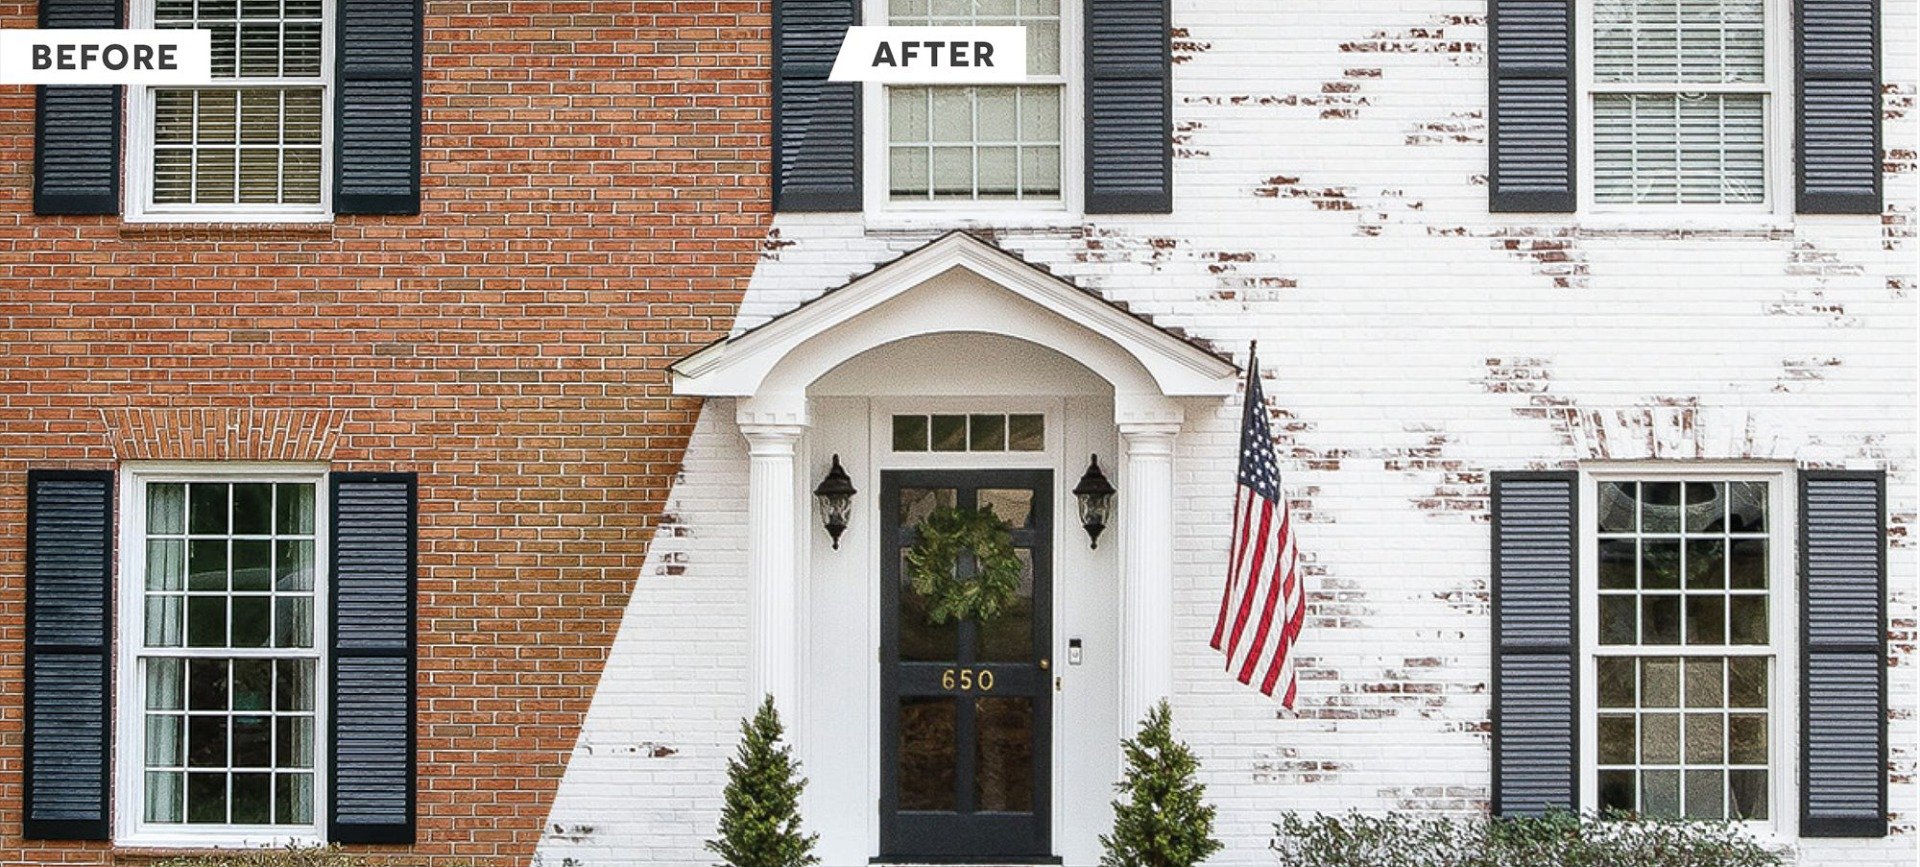 Before and after image of a house with red brick, limewashed with white